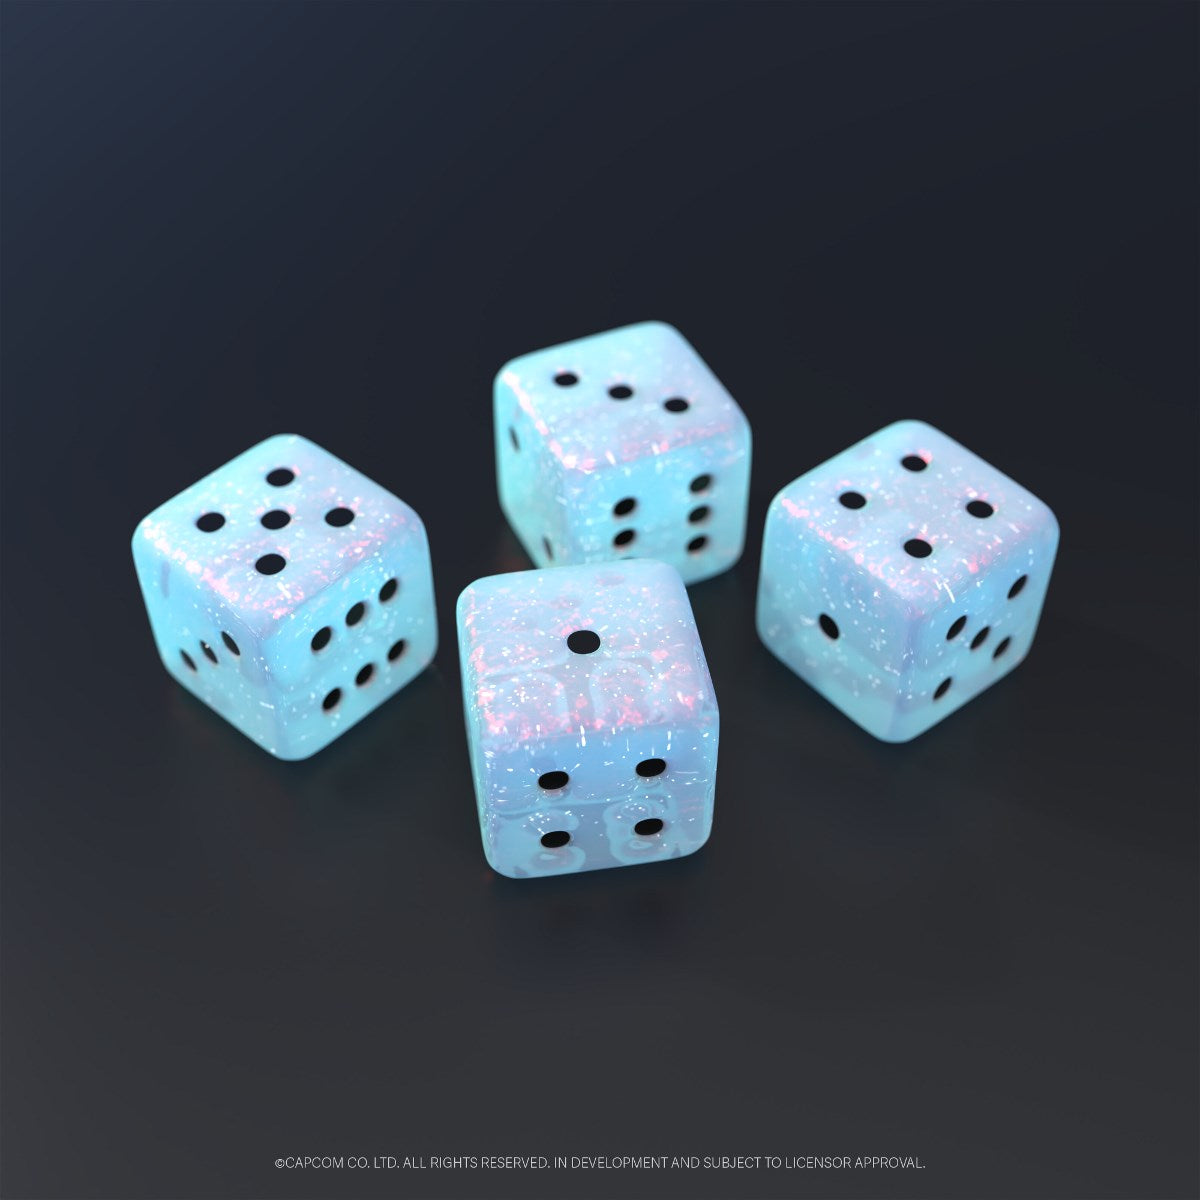 Pokemon TCG Steam Siege Dice Teal/White Set of 7 Dice New In